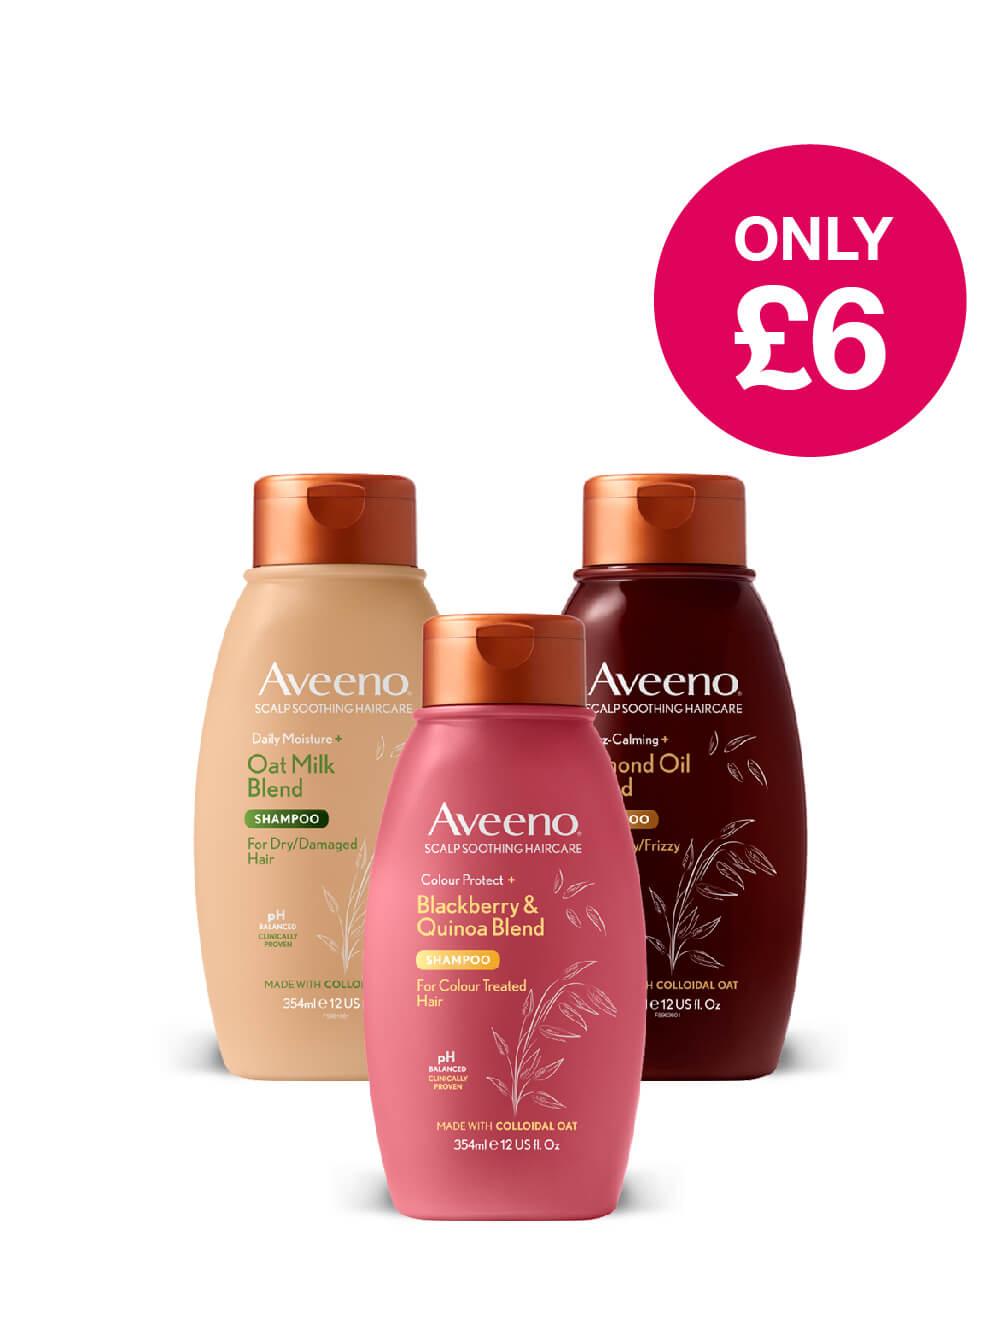 Only £6 on Aveeno Hair